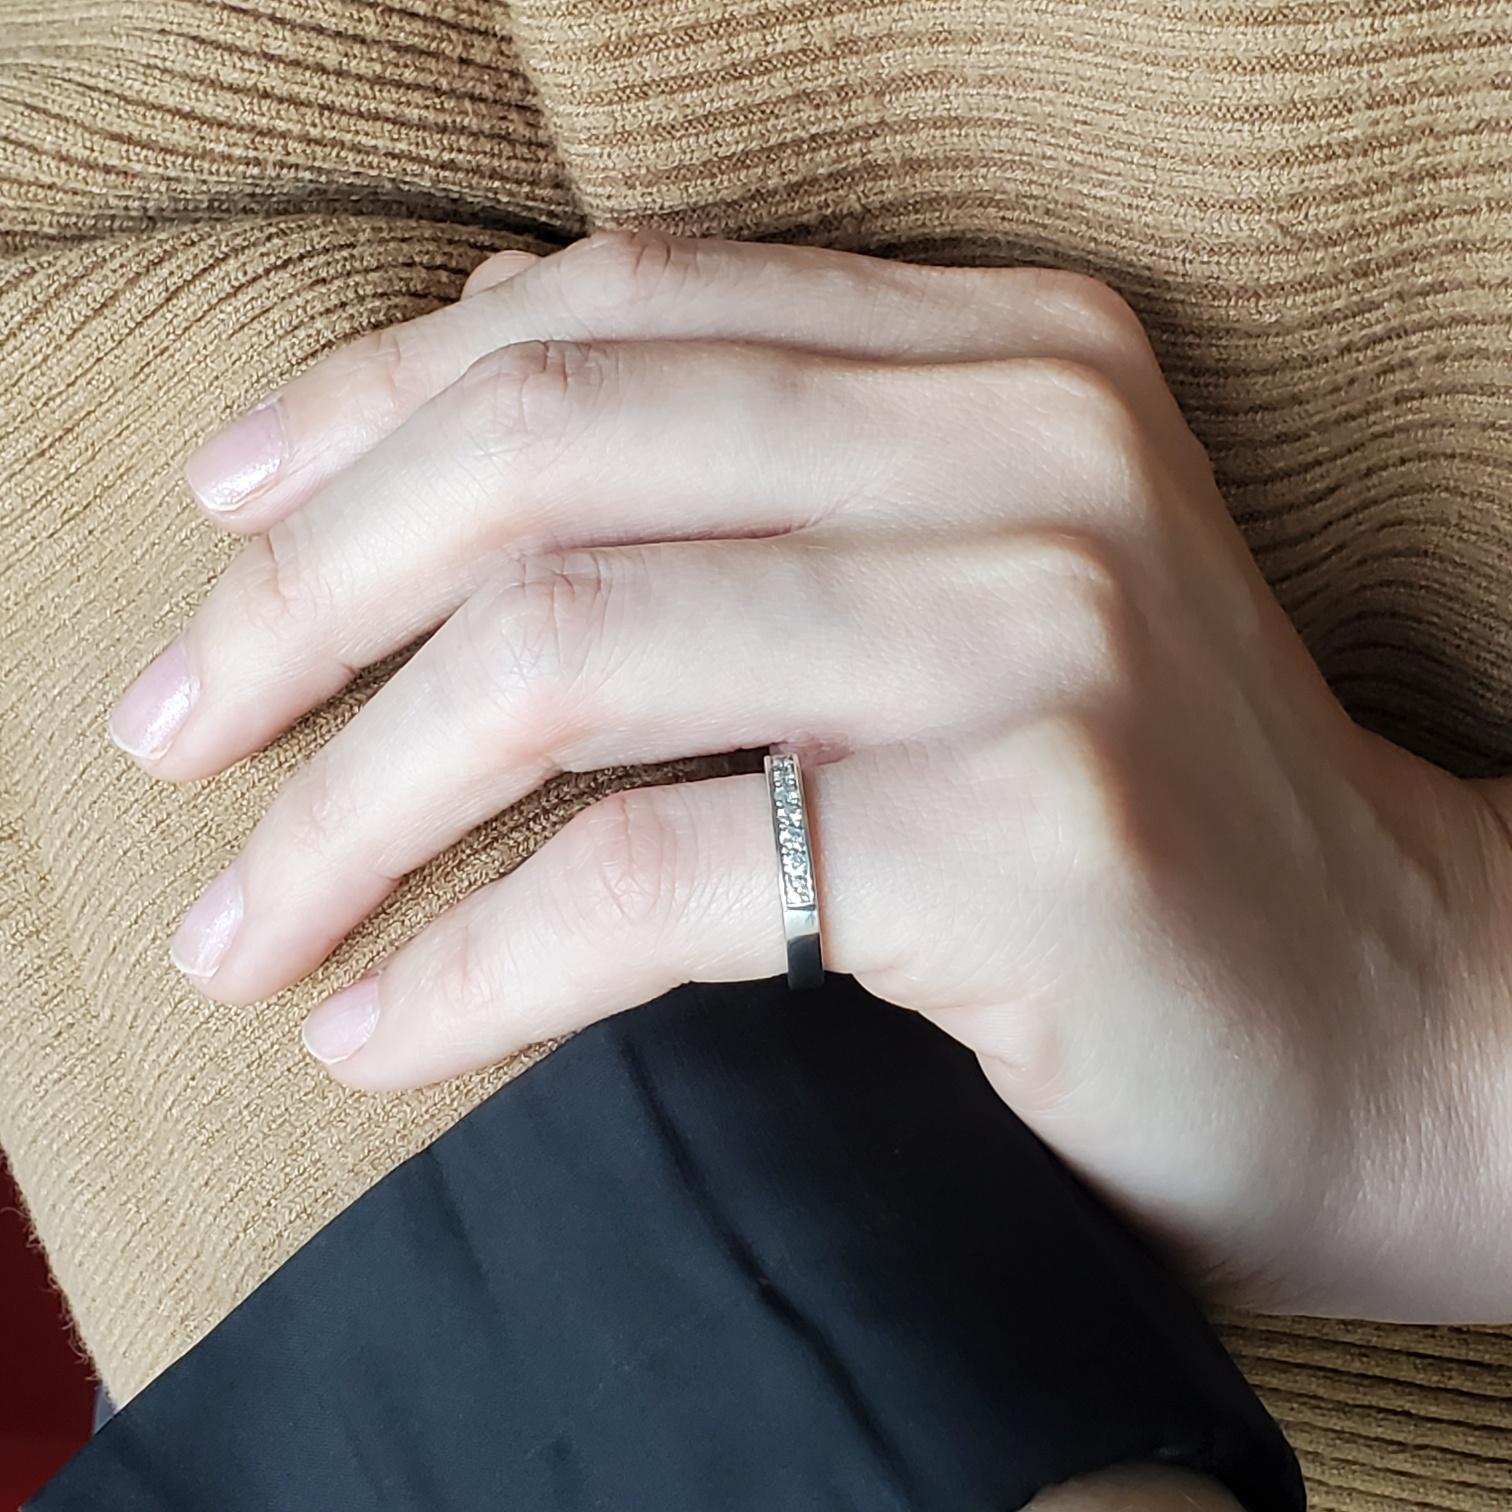 Squared half eternity ring designed by Paul Binder.

Beautiful modernist piece created at the jewelry atelier of Paul Binder in Zurich Switzerland, back in the 1970. This ring has been carefully crafted with a cushion shape, in solid white gold of